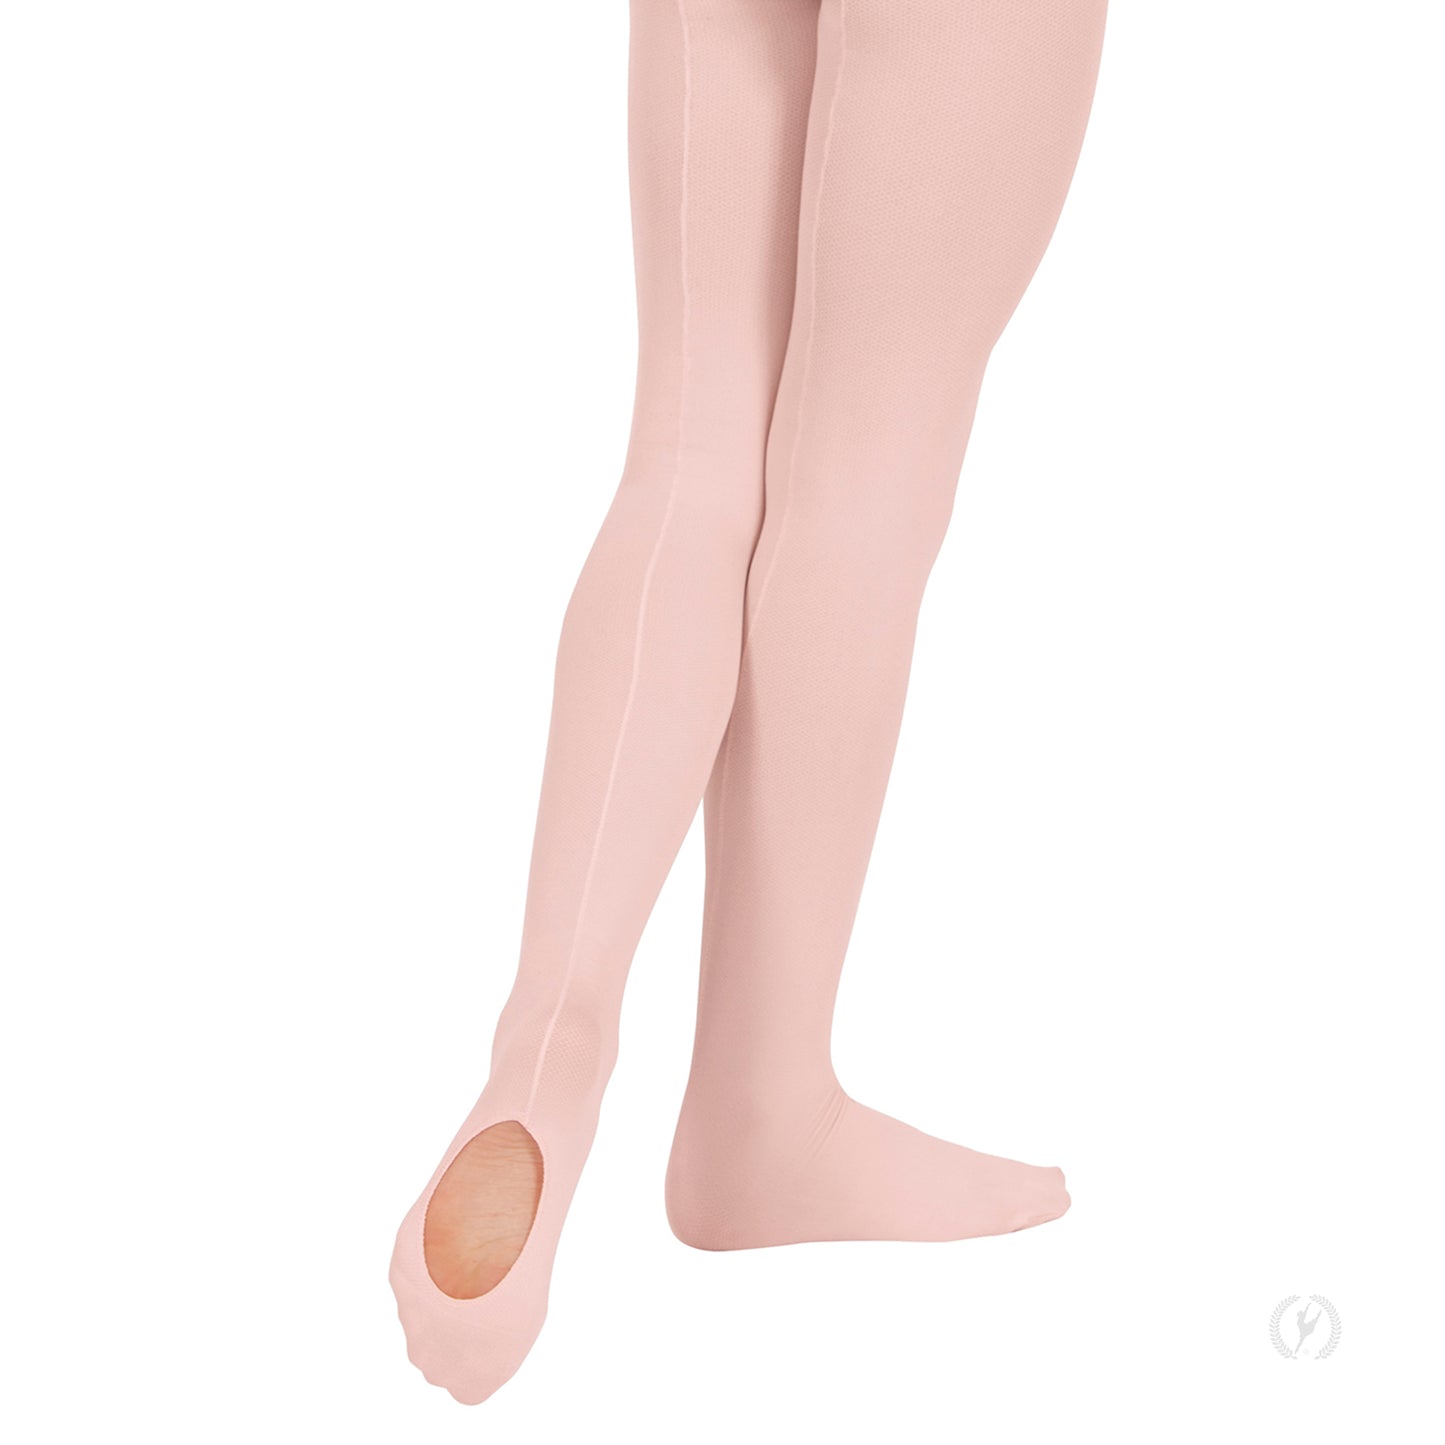 Eurotard 219c Child Professional Mesh Back Seam Convertible Tights by EuroSkins